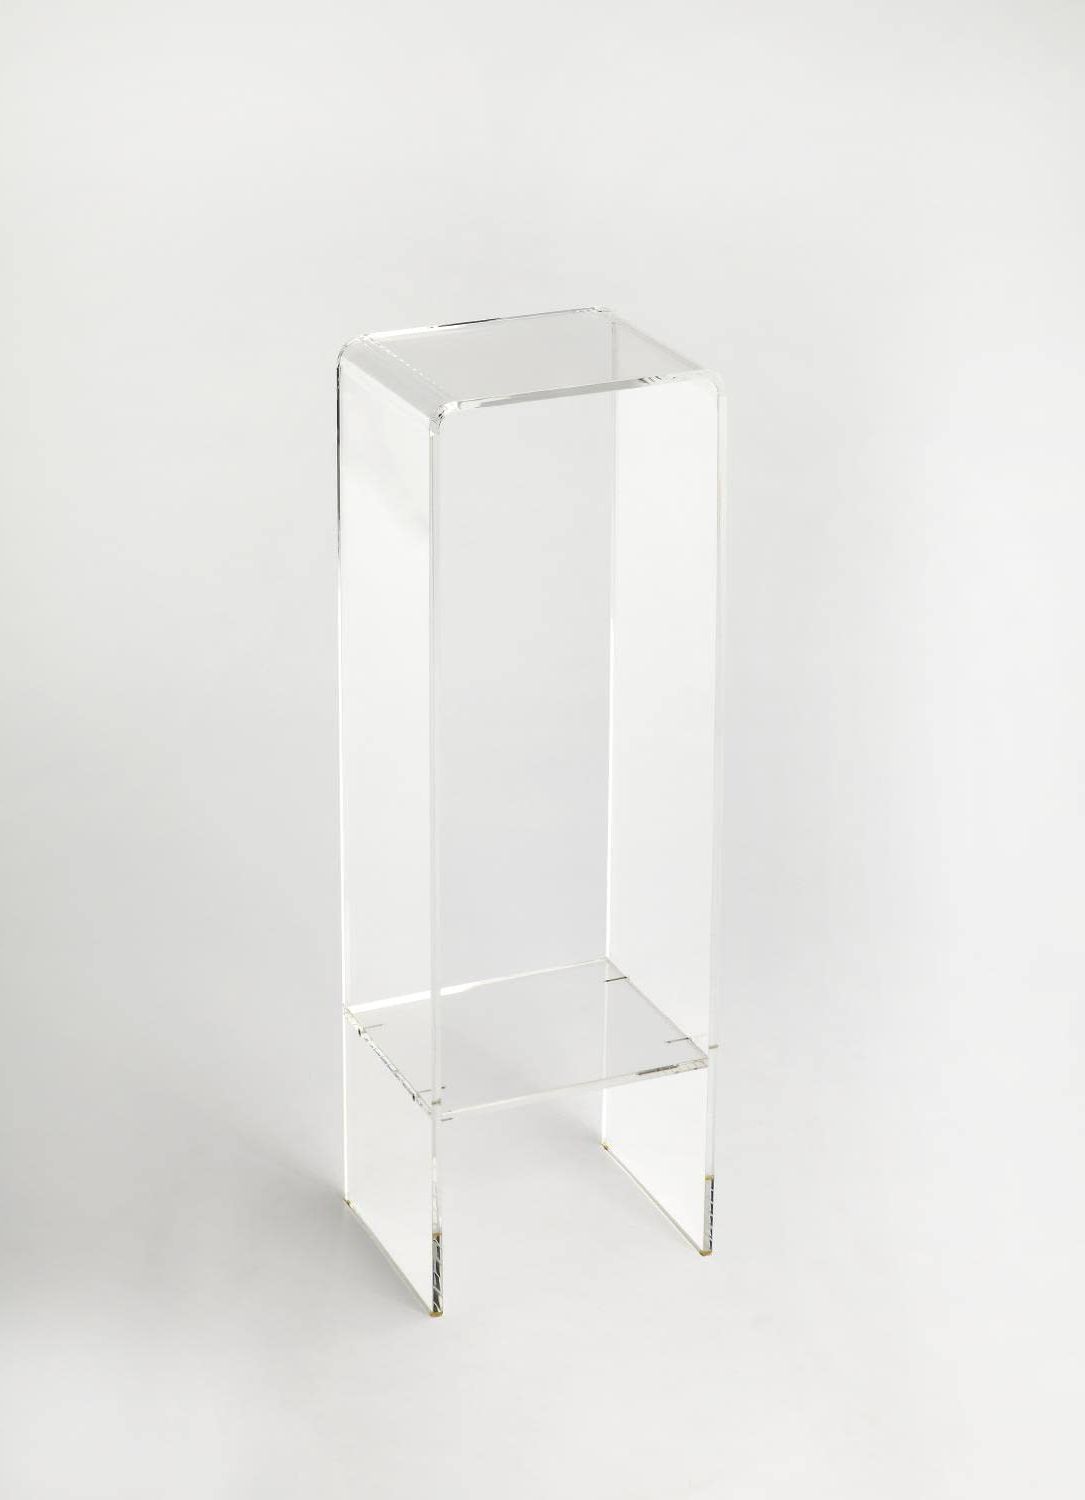 Most Up To Date Acrylic Plant Stands Within Amazon: Butler Crystal Clear Acrylic Plant Stand : Patio, Lawn & Garden (View 1 of 10)